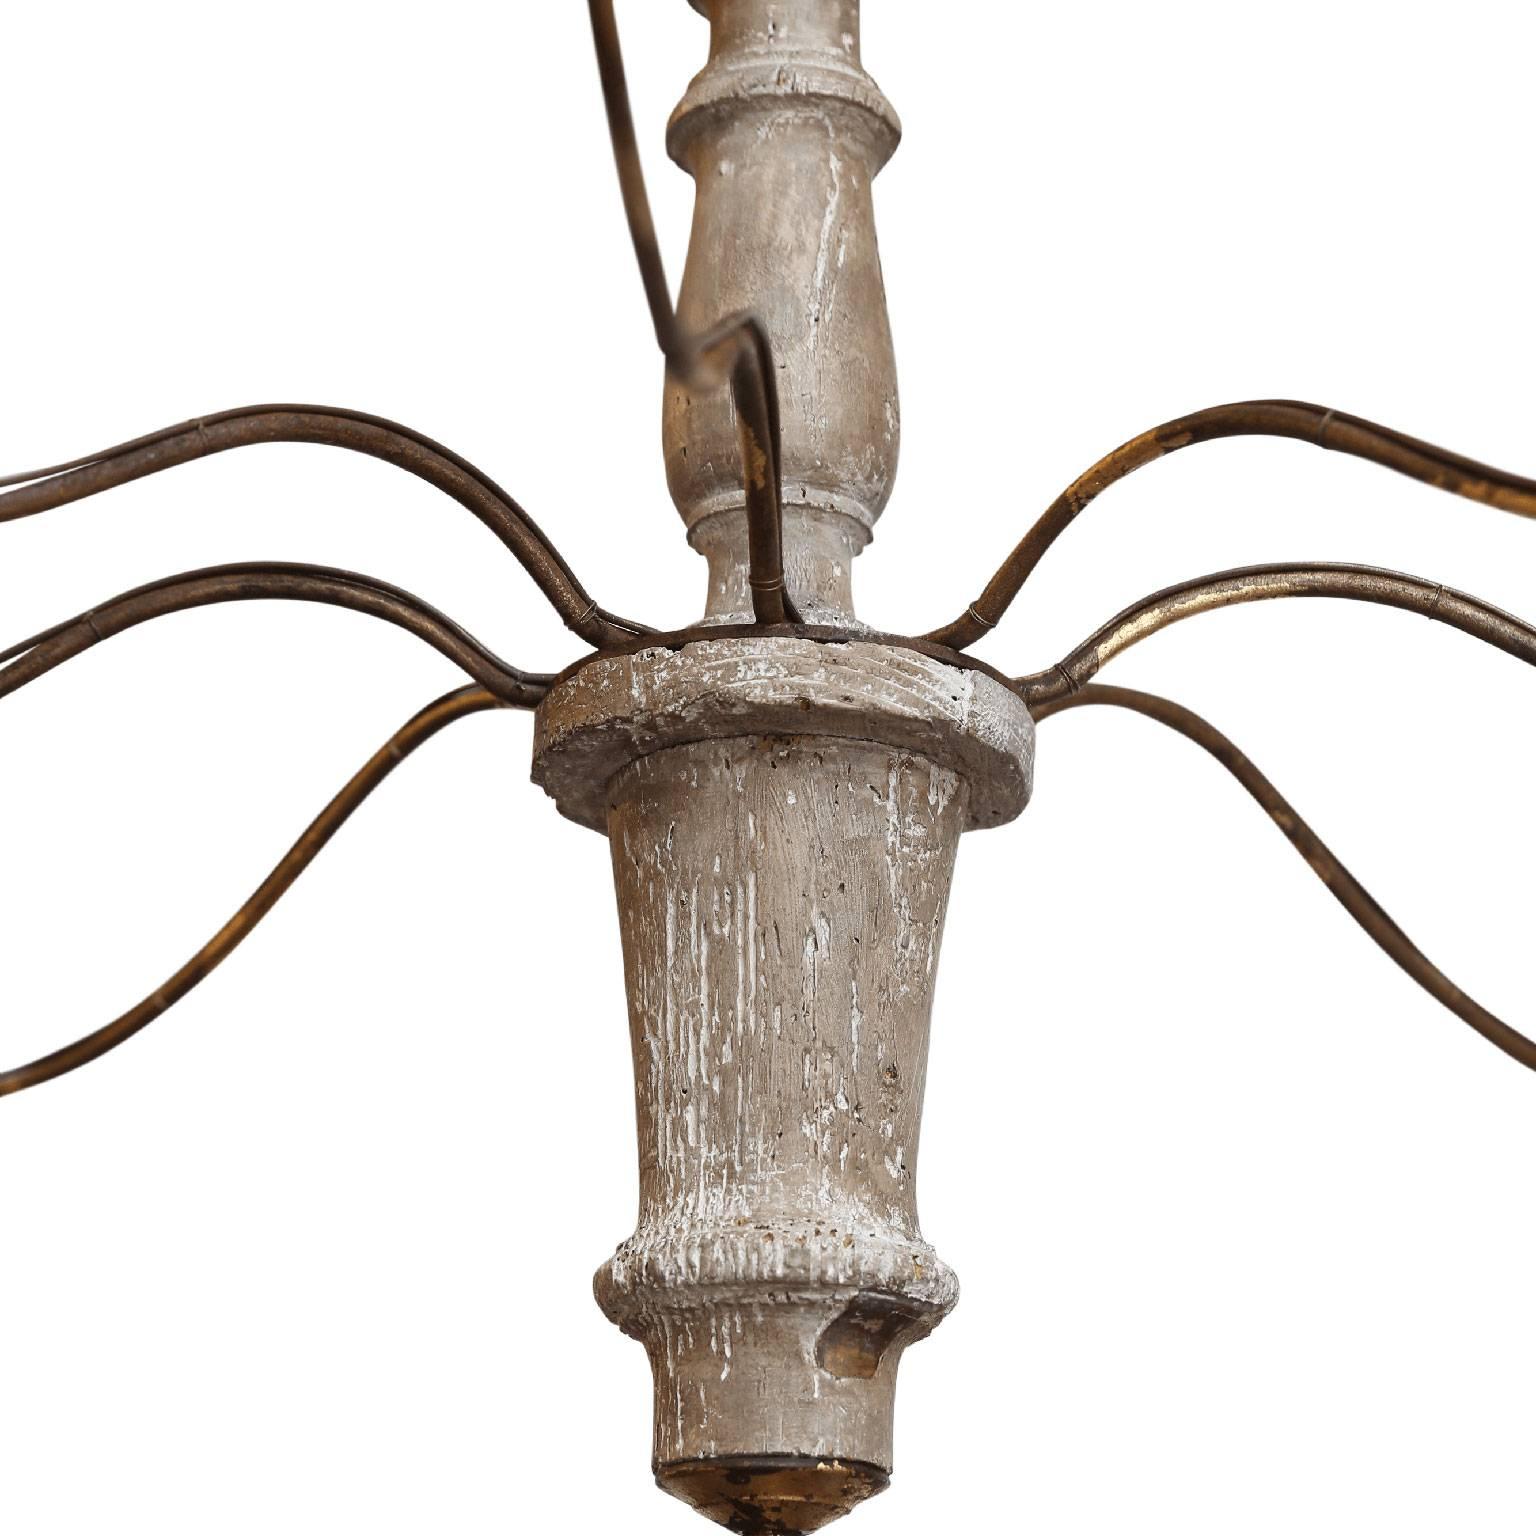 Italian chandelier from 18th-19th century elements with remnants of original gilding, newly wired with chain and canopy.